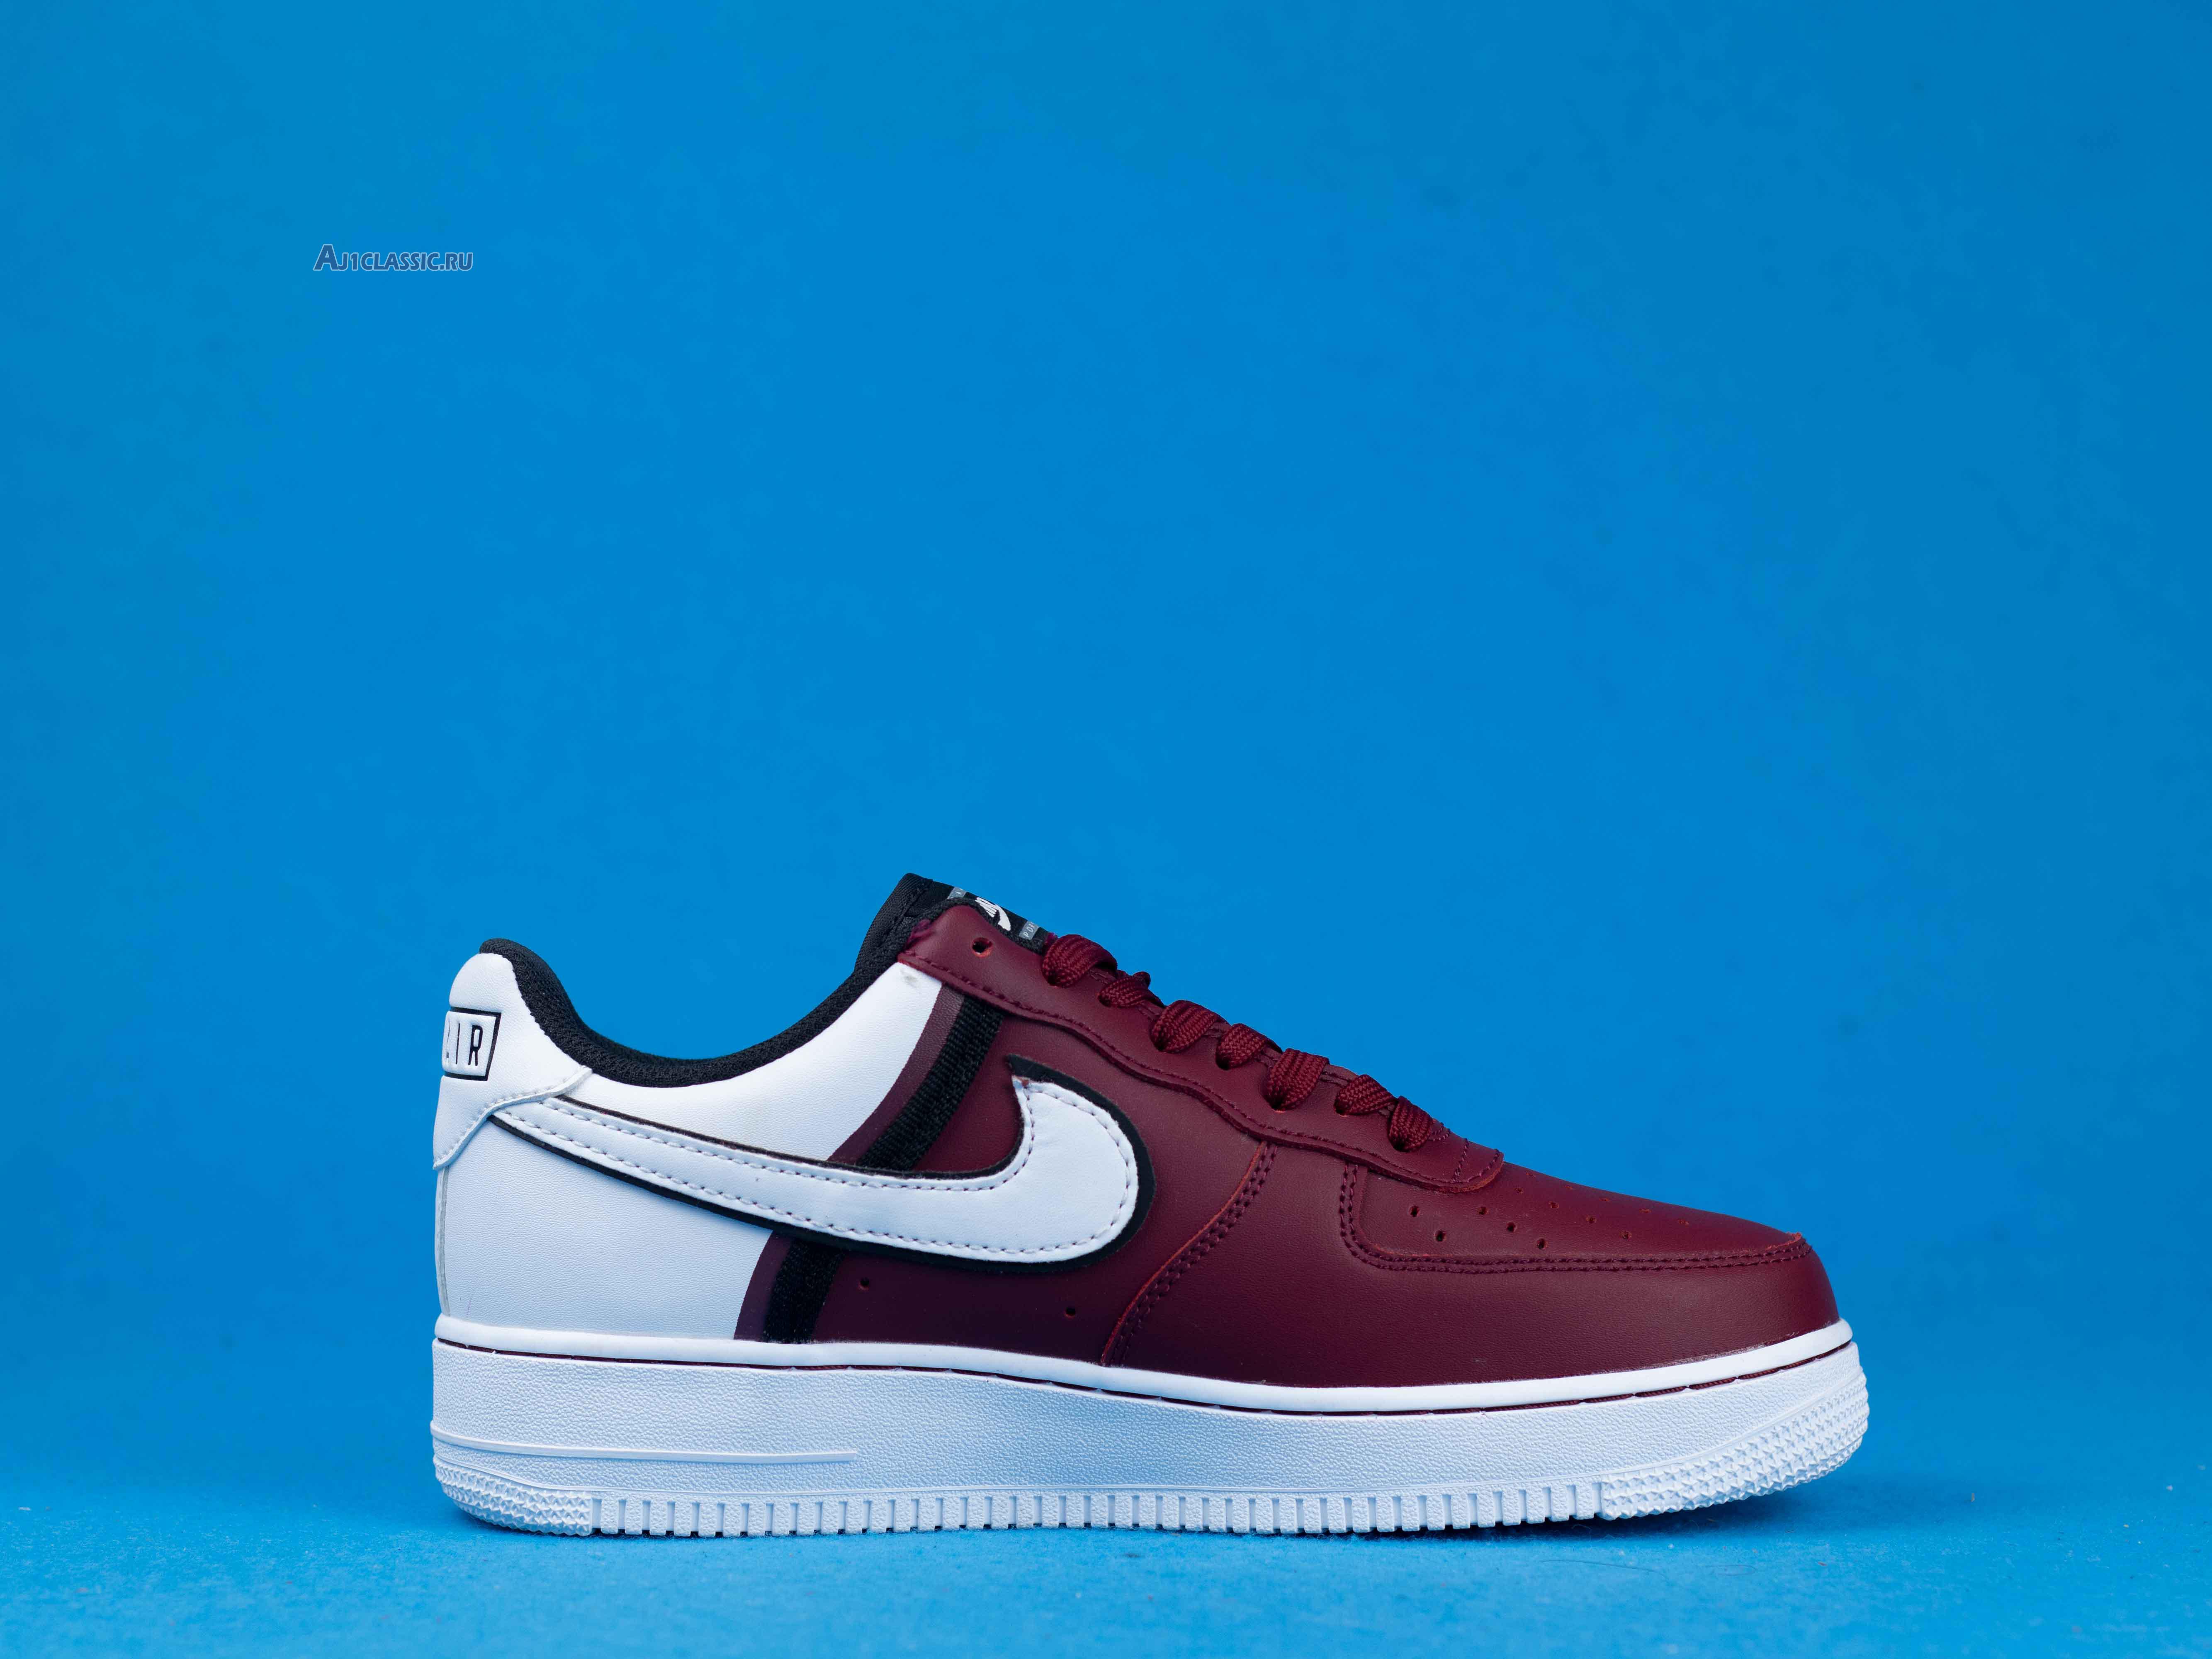 Nike Air Force 1 07 LV8 "Red" CI0061-600